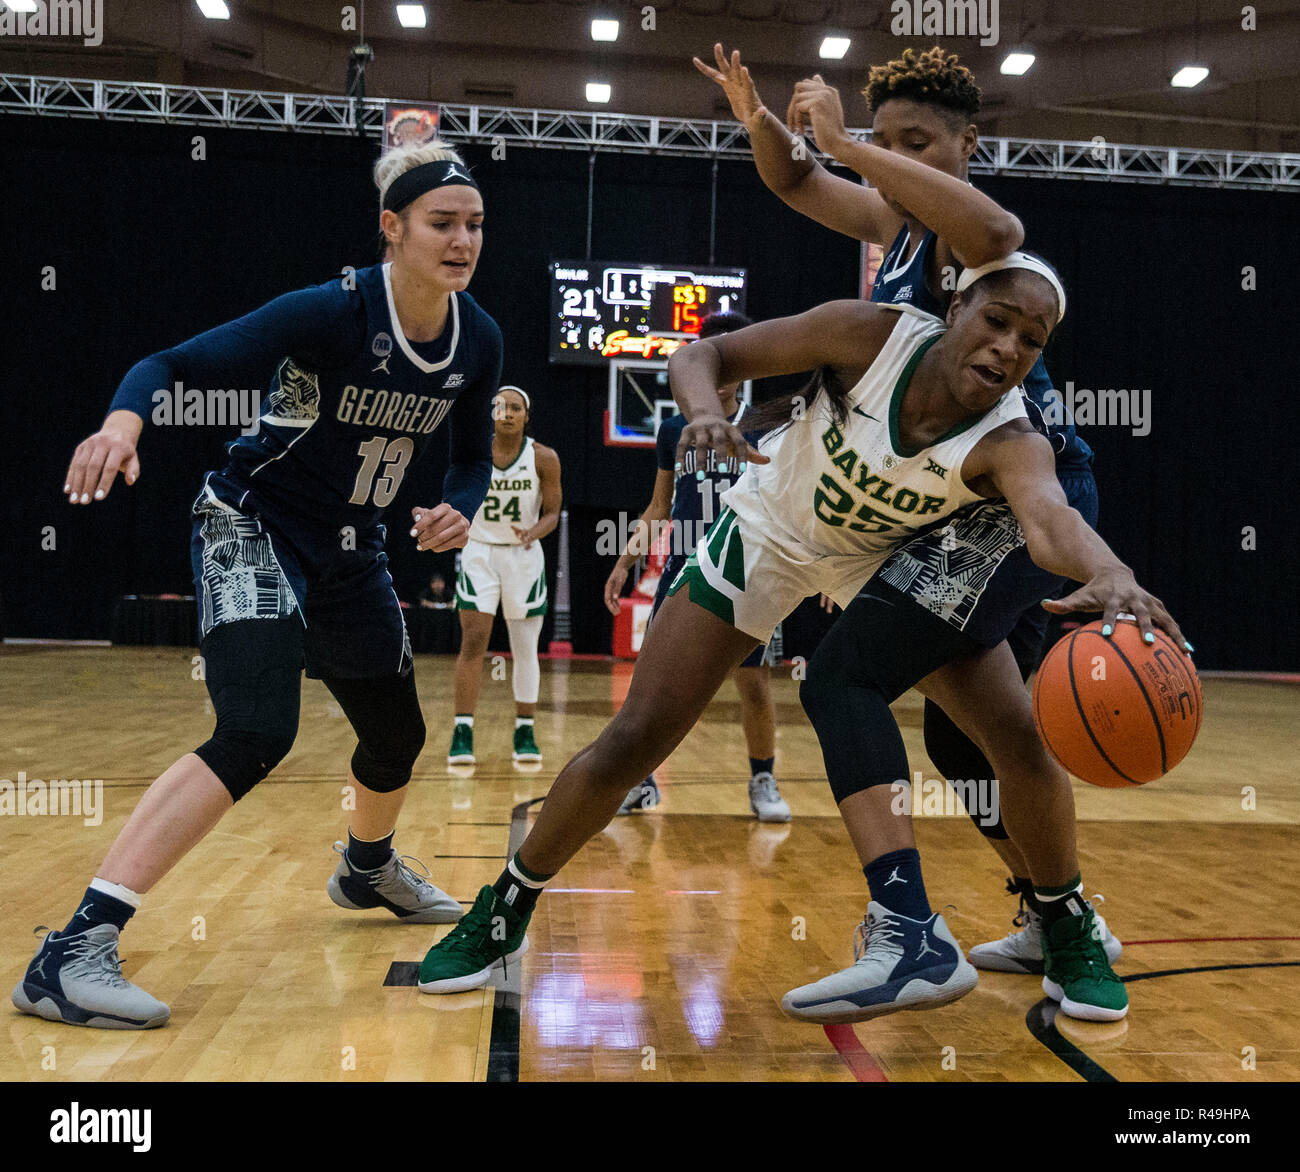 Nov 24 2018 Las Vegas, NV U.S.A. Baylor center Queen Egbo (25) battle for the rebound during the NCAA Women's Basketball Thanksgiving Shootout between Baylor Bears and the Georgetown Hoyas 67-46 win at South Point Arena Las Vegas, NV. Thurman James/CSM Stock Photo